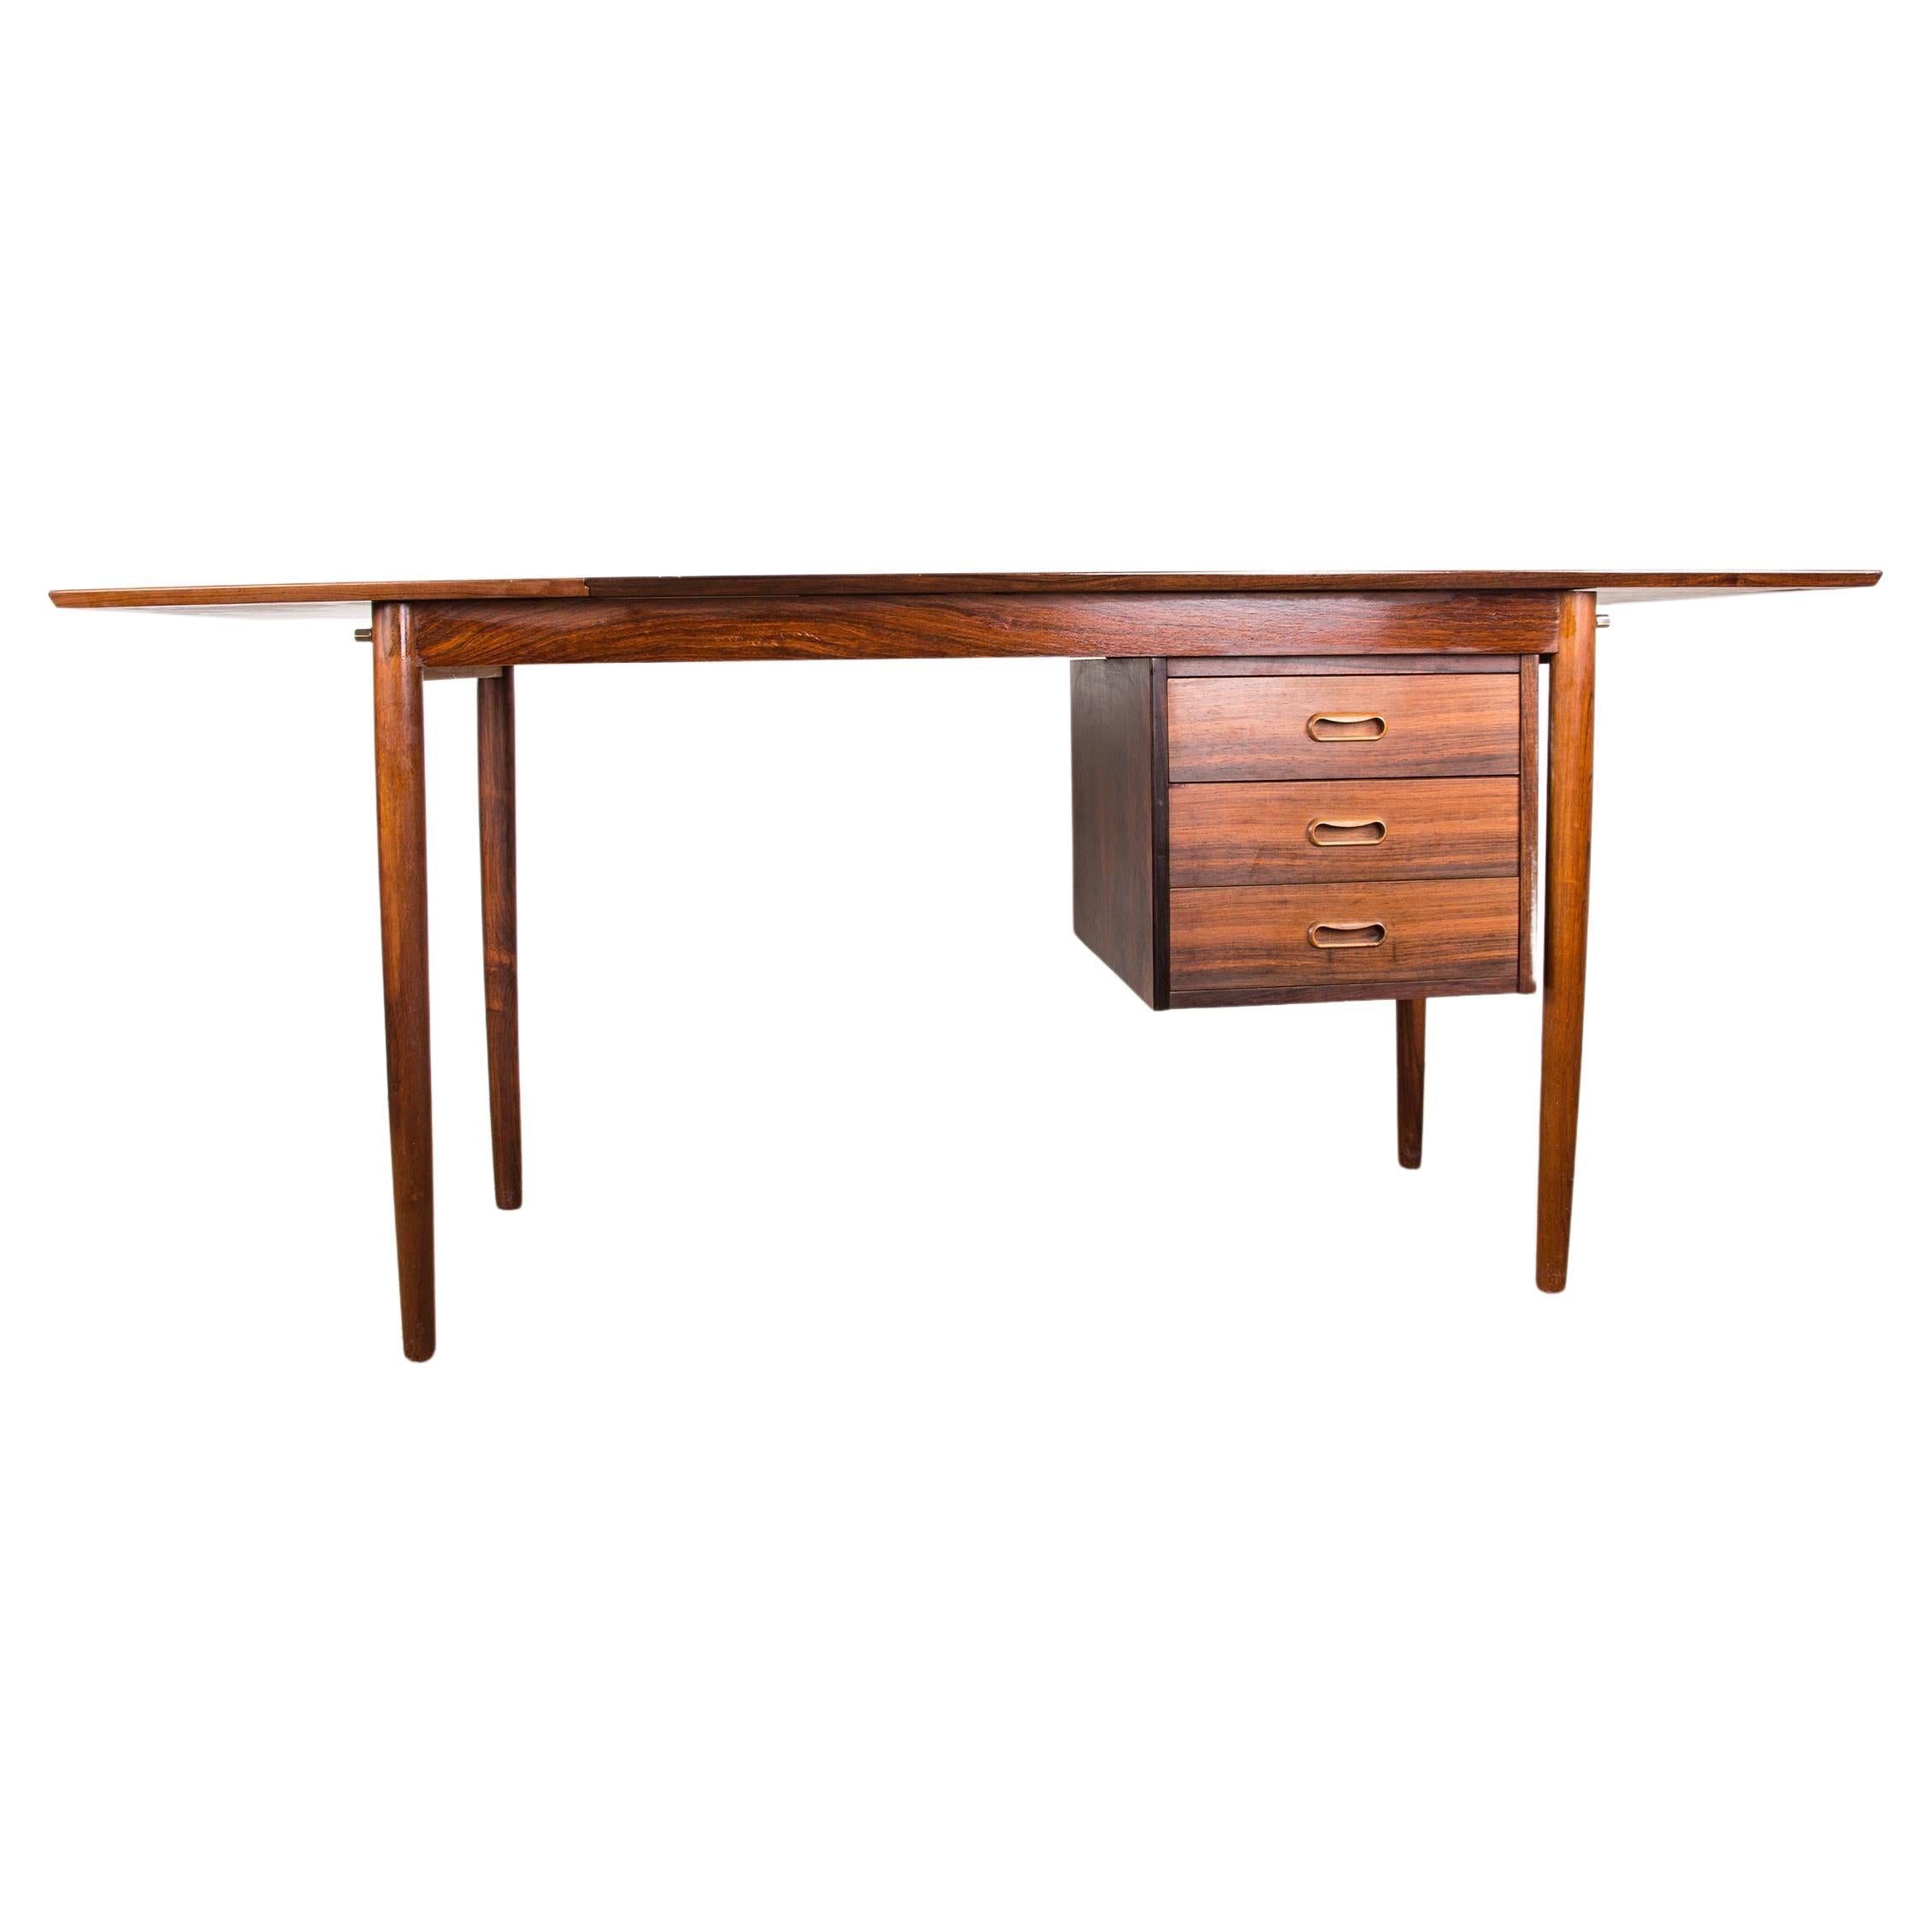 Danish rosewood desk with extension and floating box, model 0S 51 by Arne Vodder